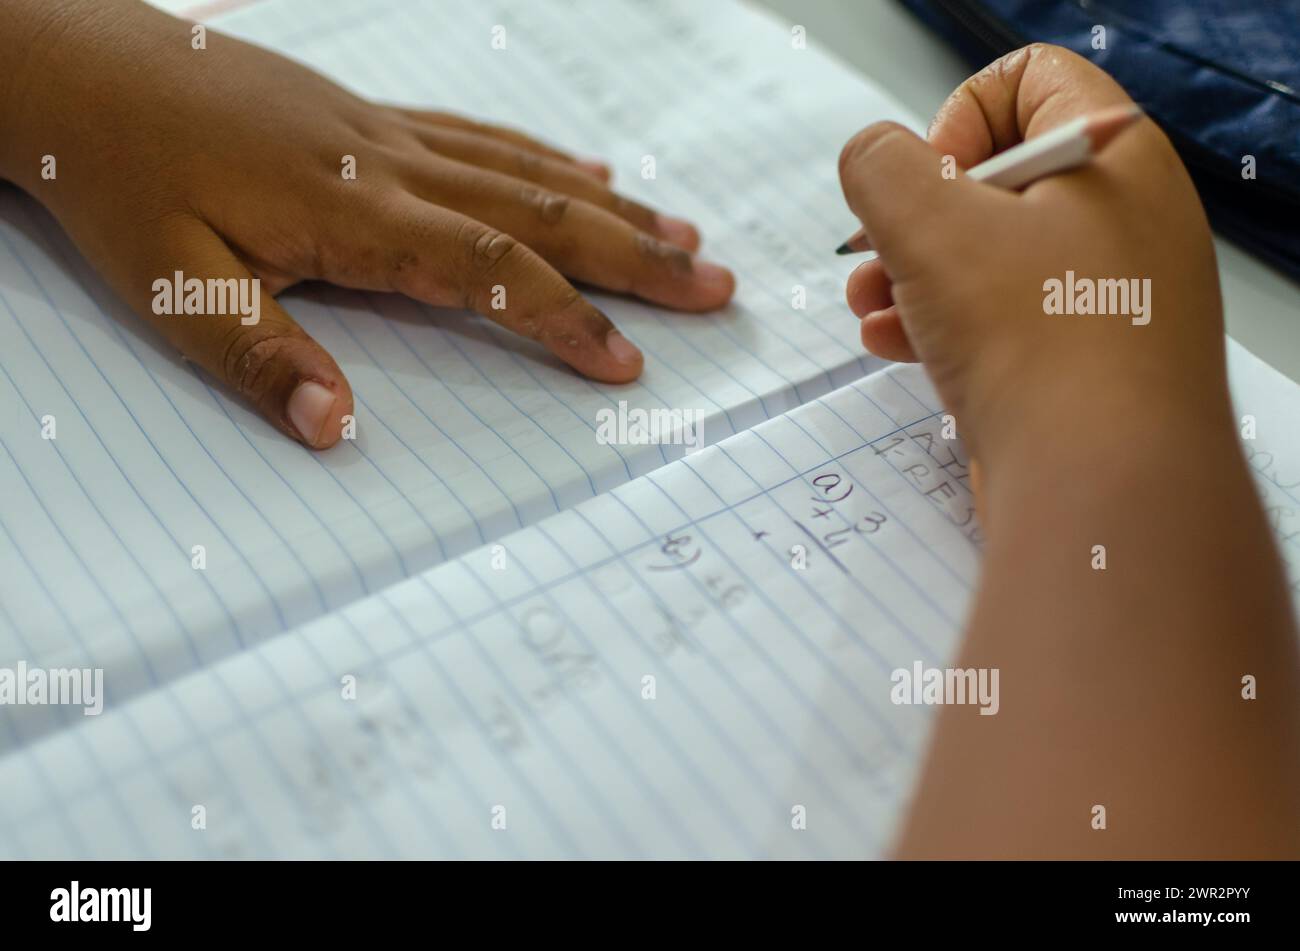 Salvador, Bahia, Brazil - April 19, 2016: Close-up portrait of the hands of a public school student writing in a notebook. City of Salvador, Bahia. Stock Photo